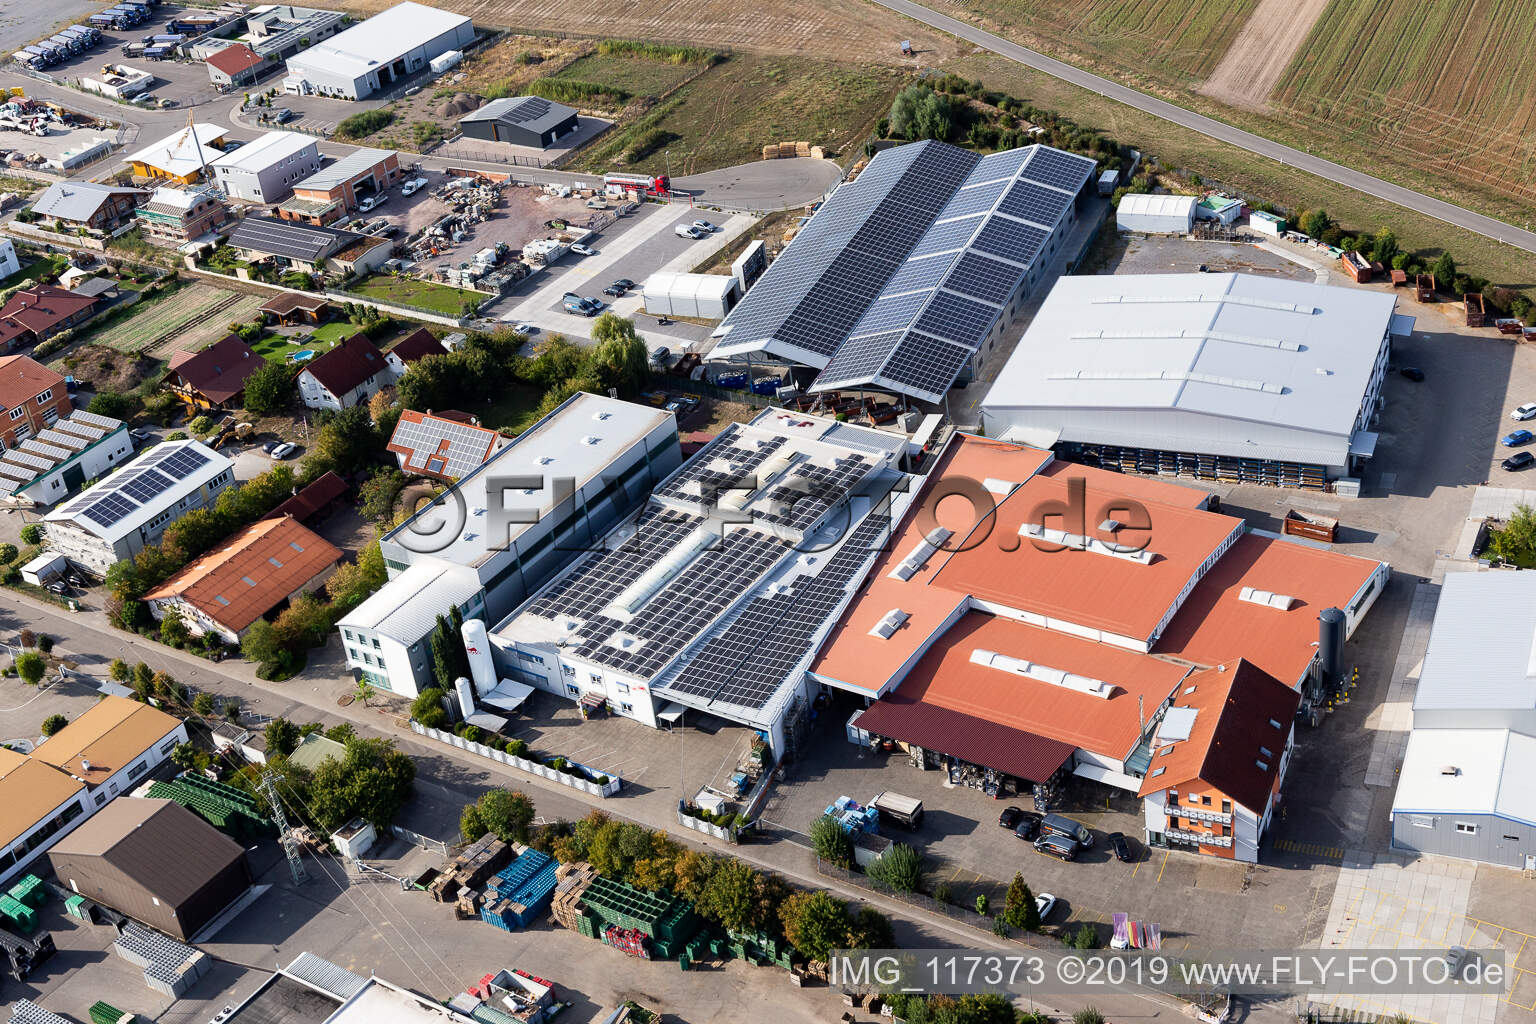 Drone recording of Commercial area Im Gereut, HGGS LaserCUT GmbH & Co. KG in Hatzenbühl in the state Rhineland-Palatinate, Germany